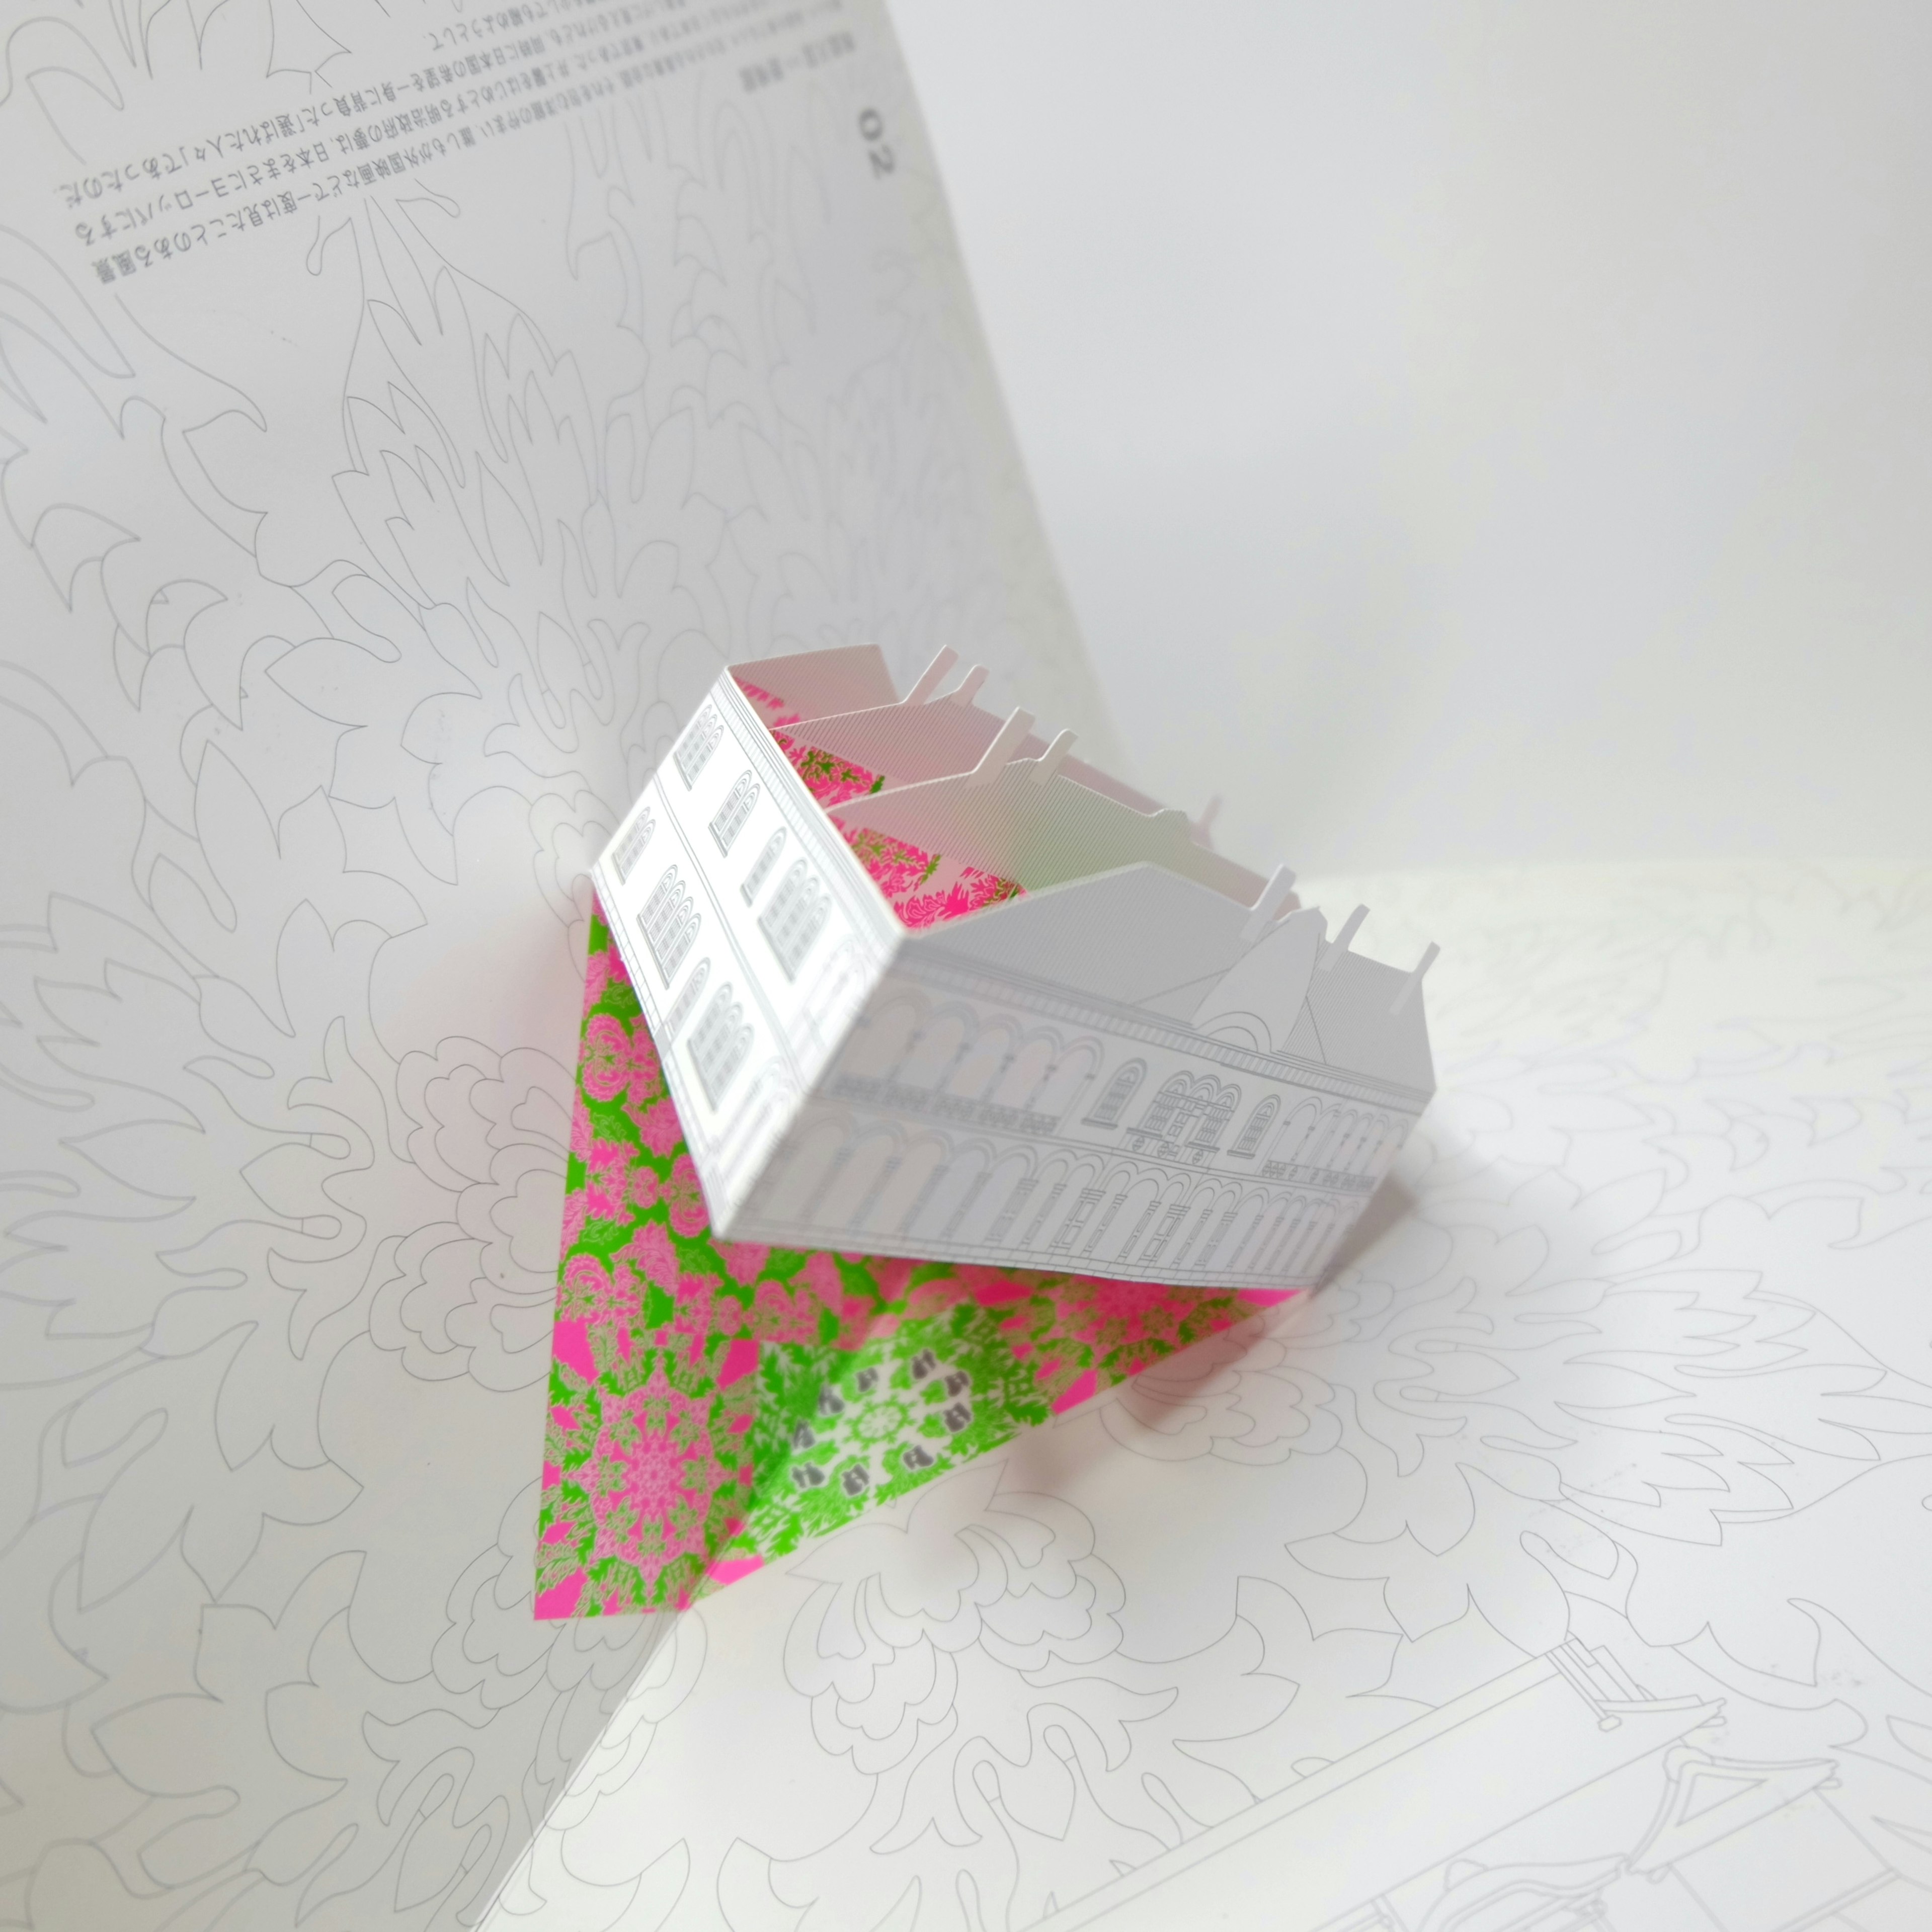 Pop-up pop-up, paper craft design for children and adults